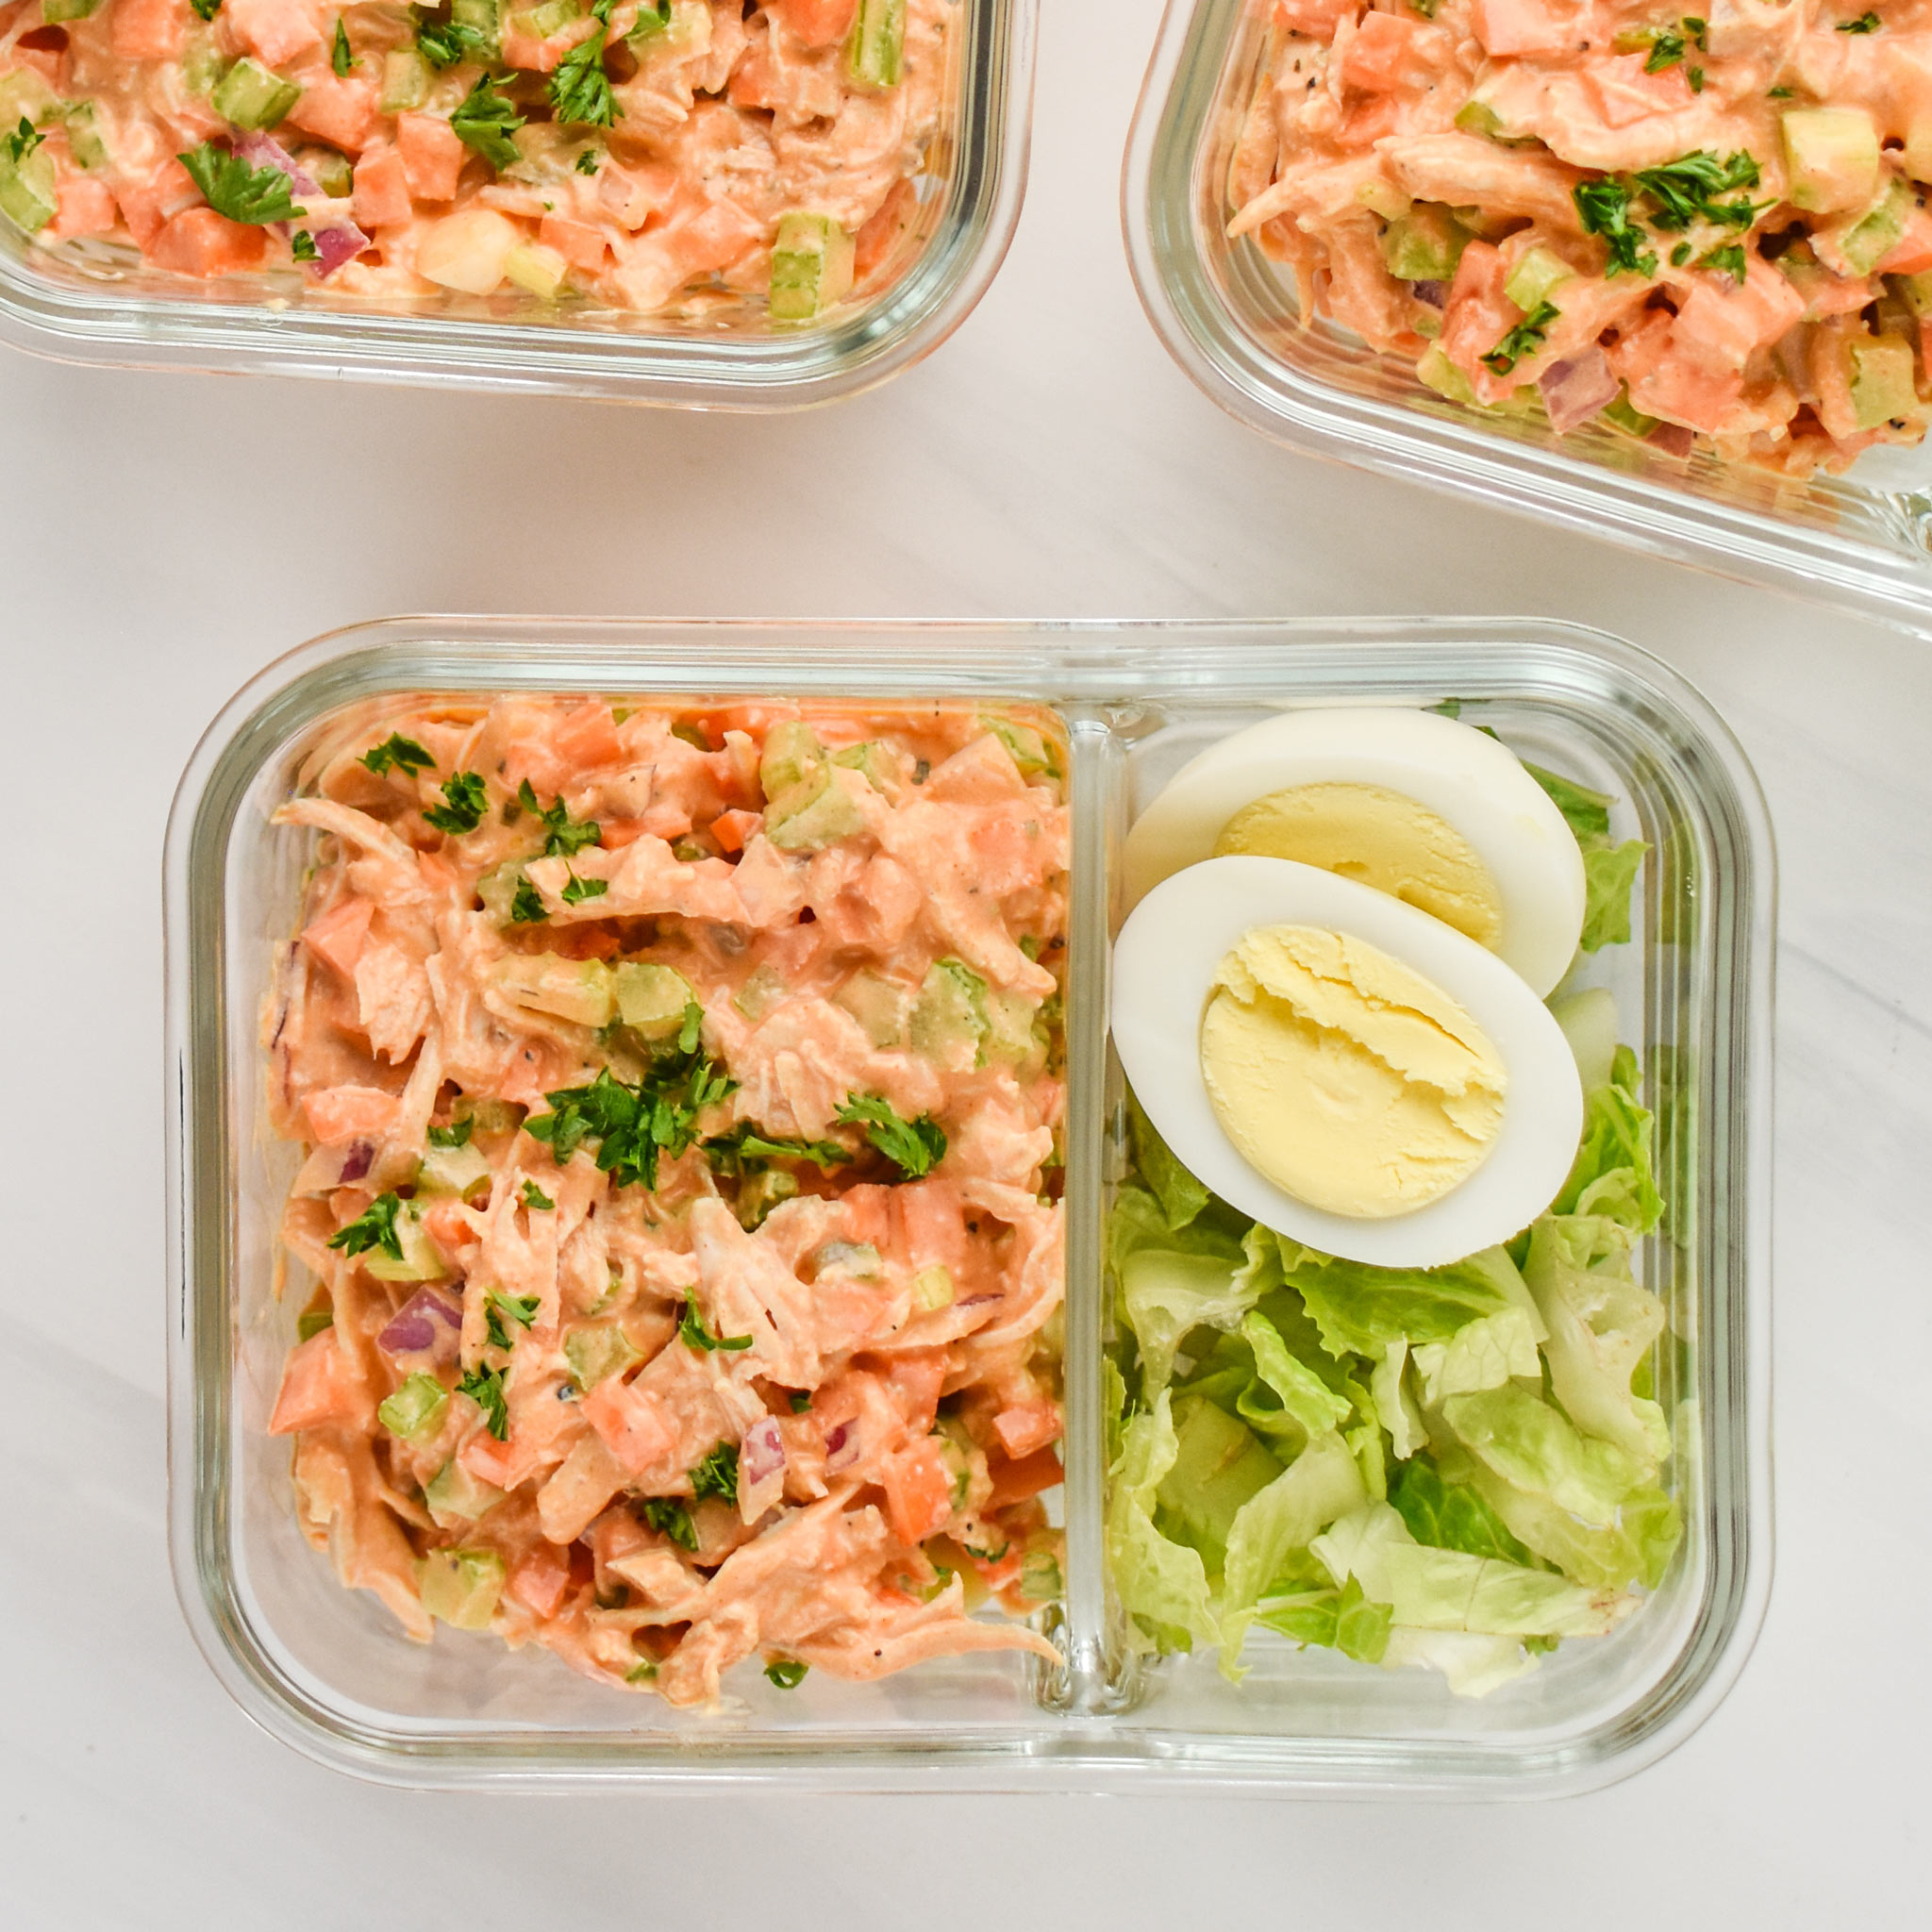 Easy Buffalo Chicken Salad meal prepped with a hard boiled egg and chopped romaine